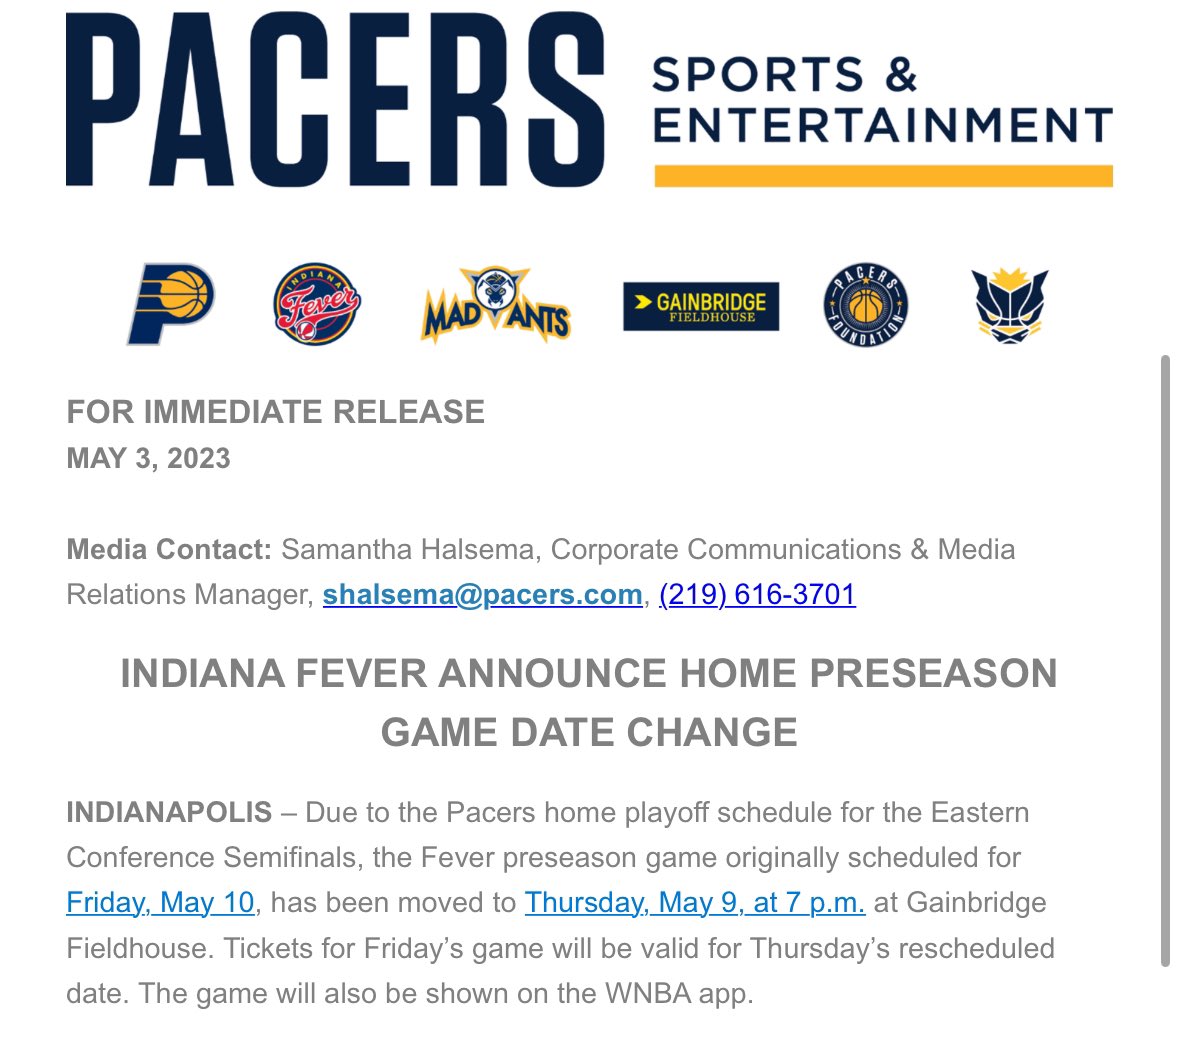 NEW: The Fever home preseason game for next week has been moved to THURSDAY. Game Three of Pacers vs. Knicks is now taking over the Friday date. Tickets already bought for the Fever game will be valid for Thursday. @FOX59 @CBS4Indy